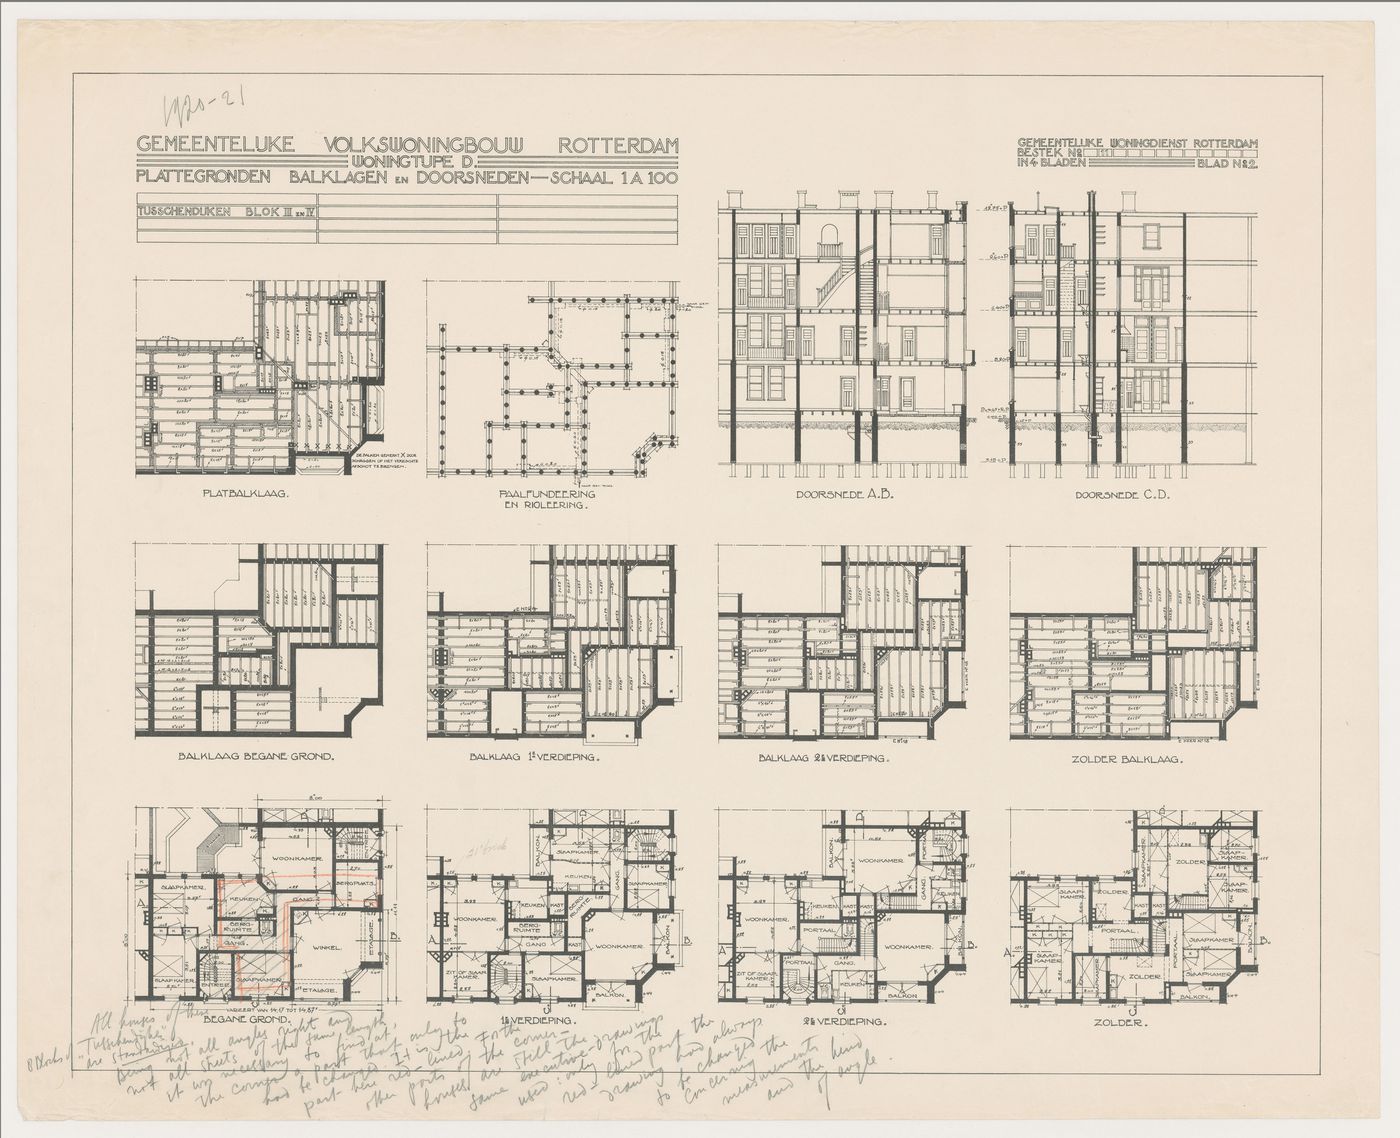 Floor, piling and framing plans and sections for Blocks 3 and 4, Tusschendijken Housing Estate, Rotterdam, Netherlands